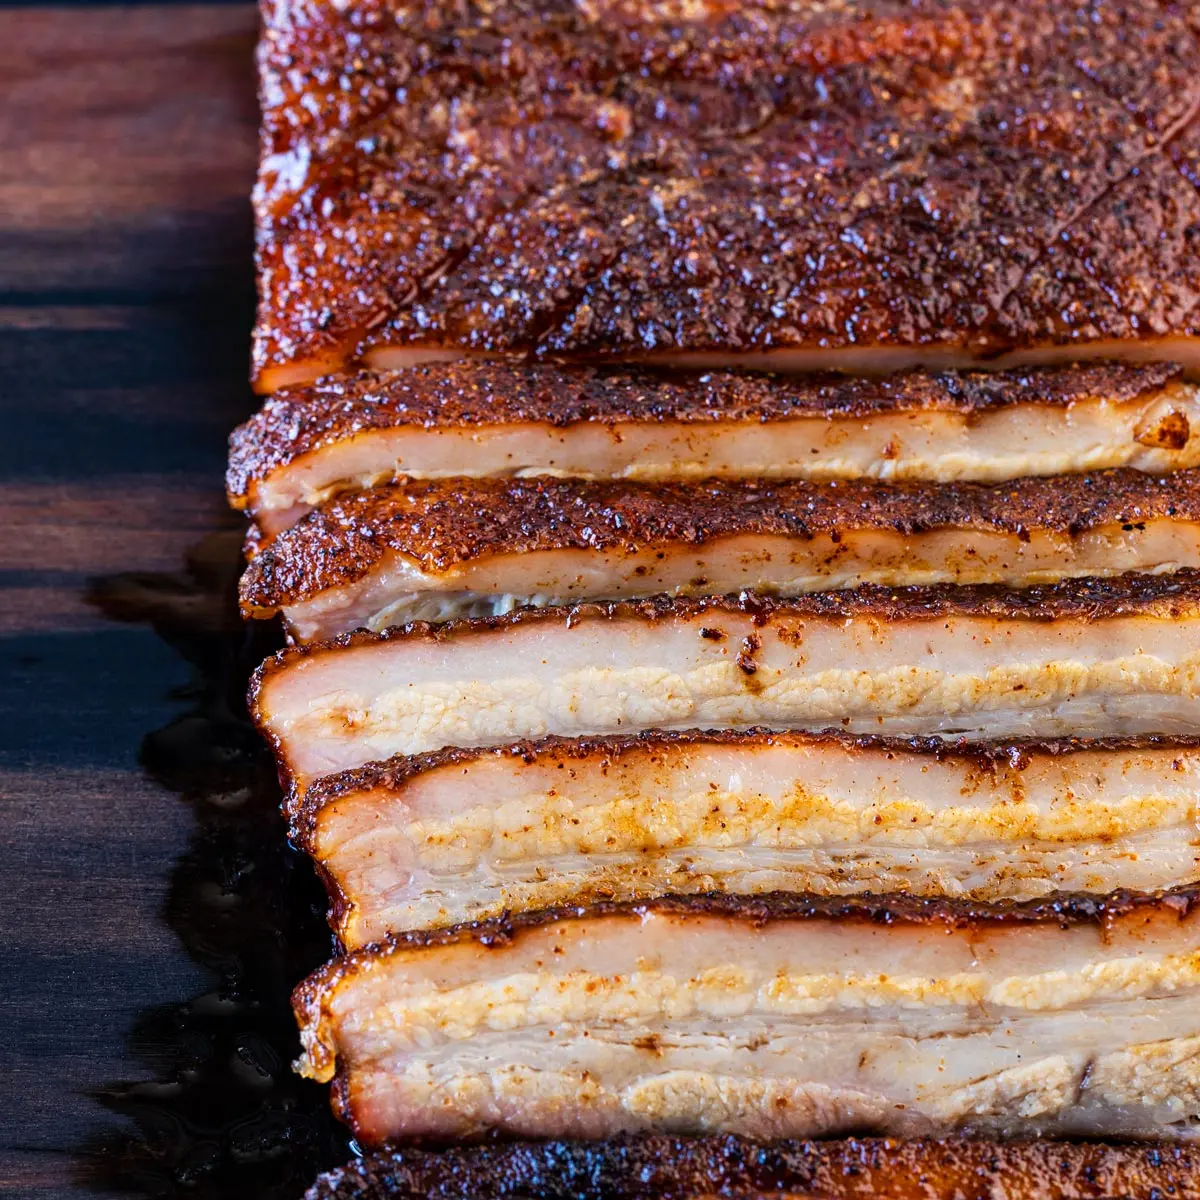 bbq smoked pork belly recipes - Is it better to boil pork belly before grilling